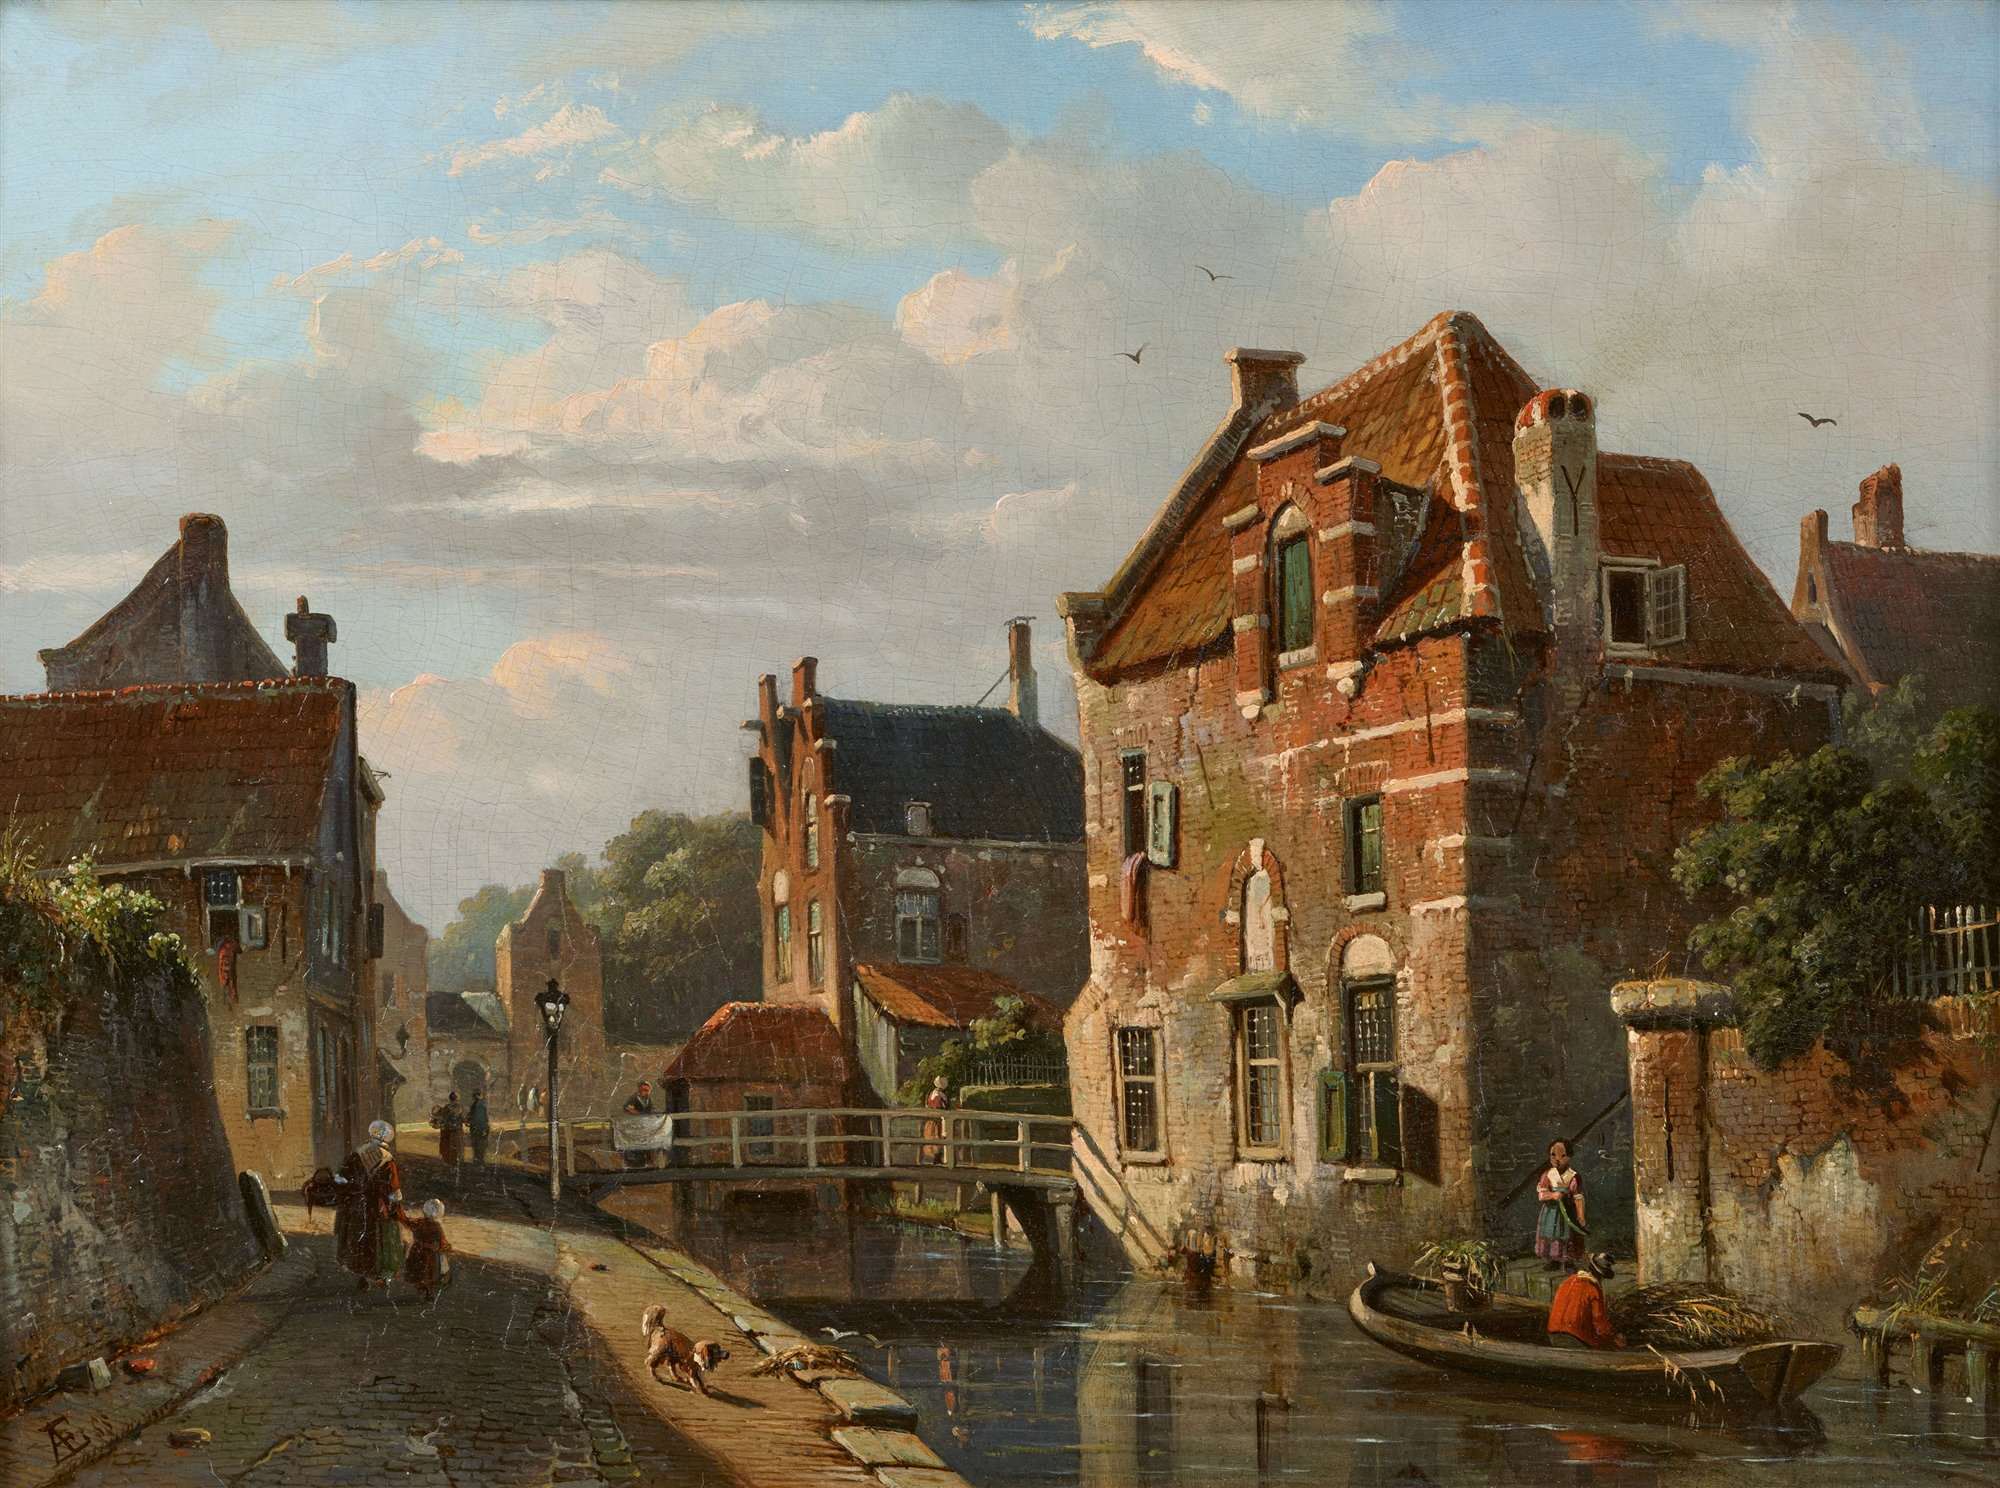 Adrianus Eversen, Pair of paintings: Summer View of a Town with a Haywain and Figures, Dutch Canal S - Image 2 of 2